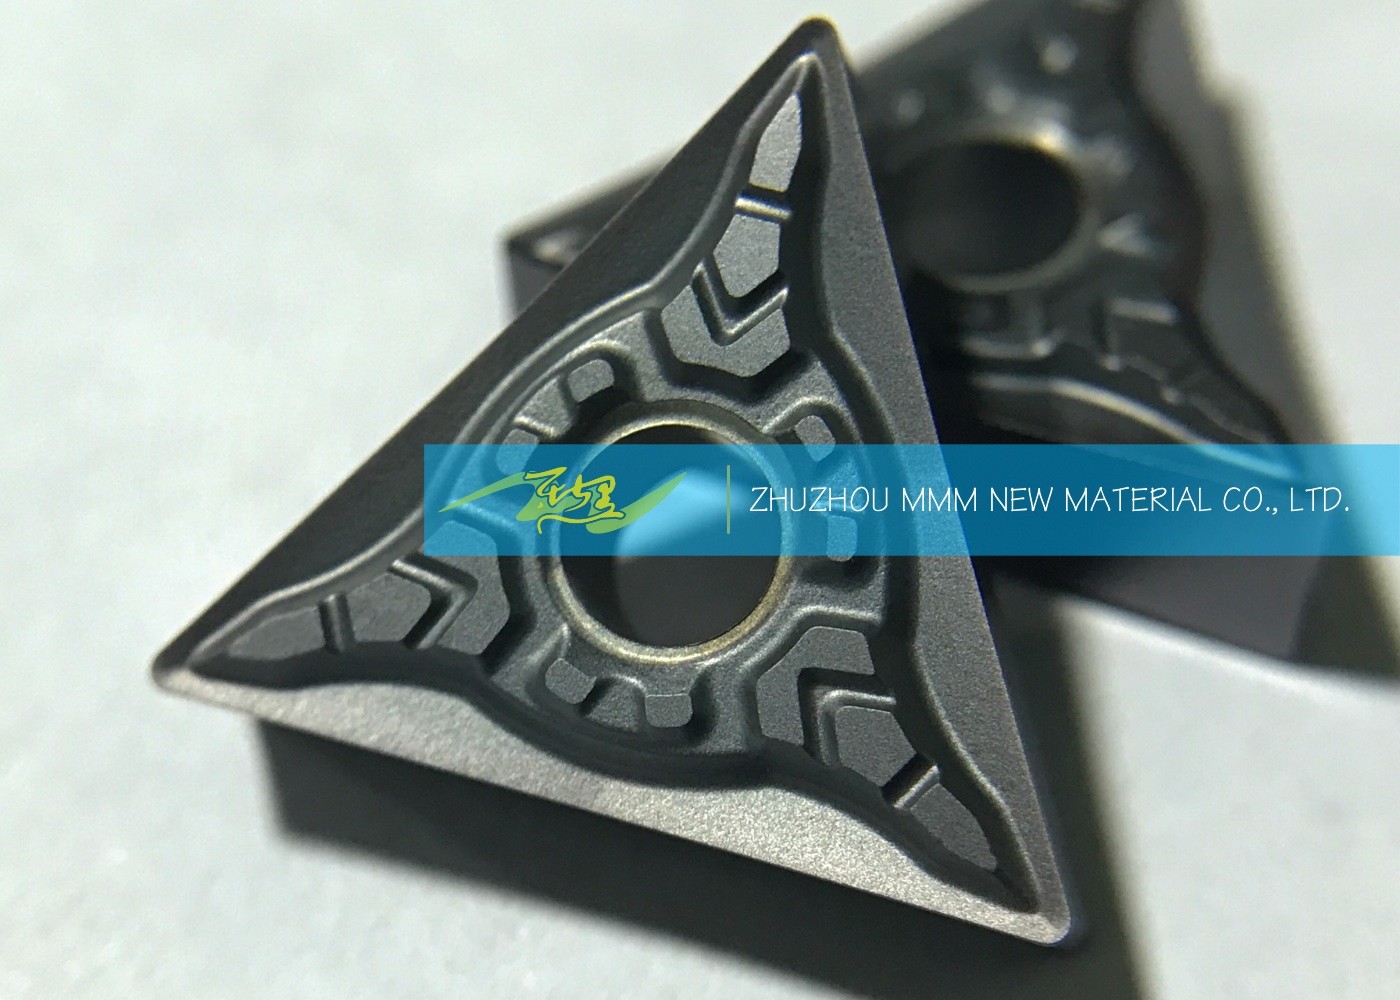 High Hardness Wear Resistance Strong Impact Resistance Stainless Steel Finishing For Steel CNC Insert Carbide Insert 